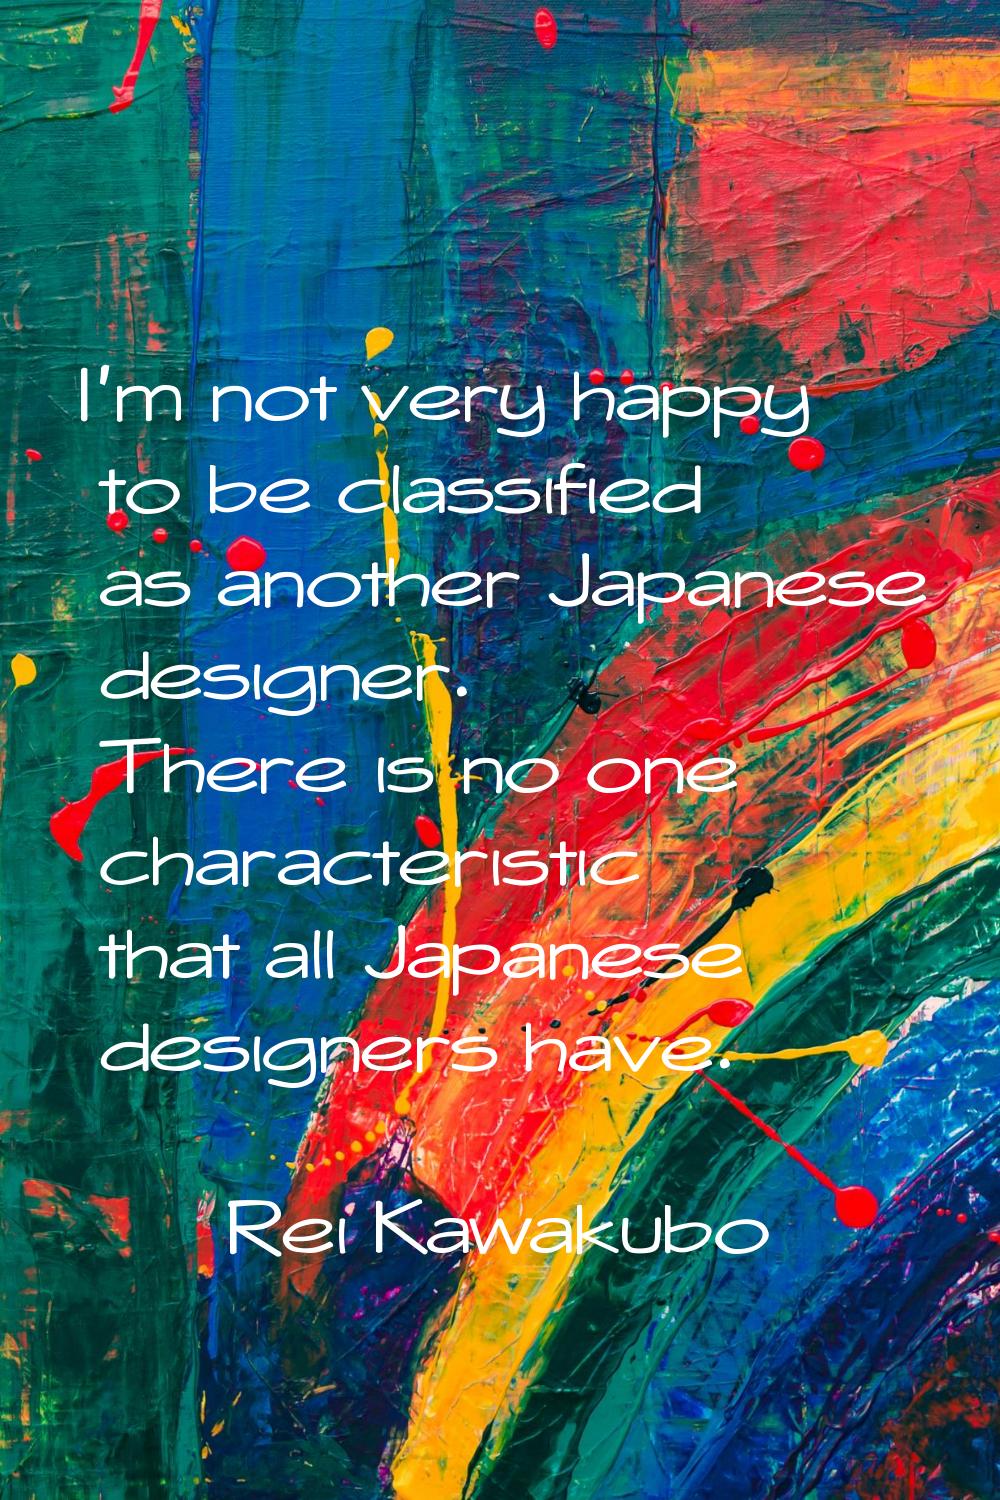 I'm not very happy to be classified as another Japanese designer. There is no one characteristic th